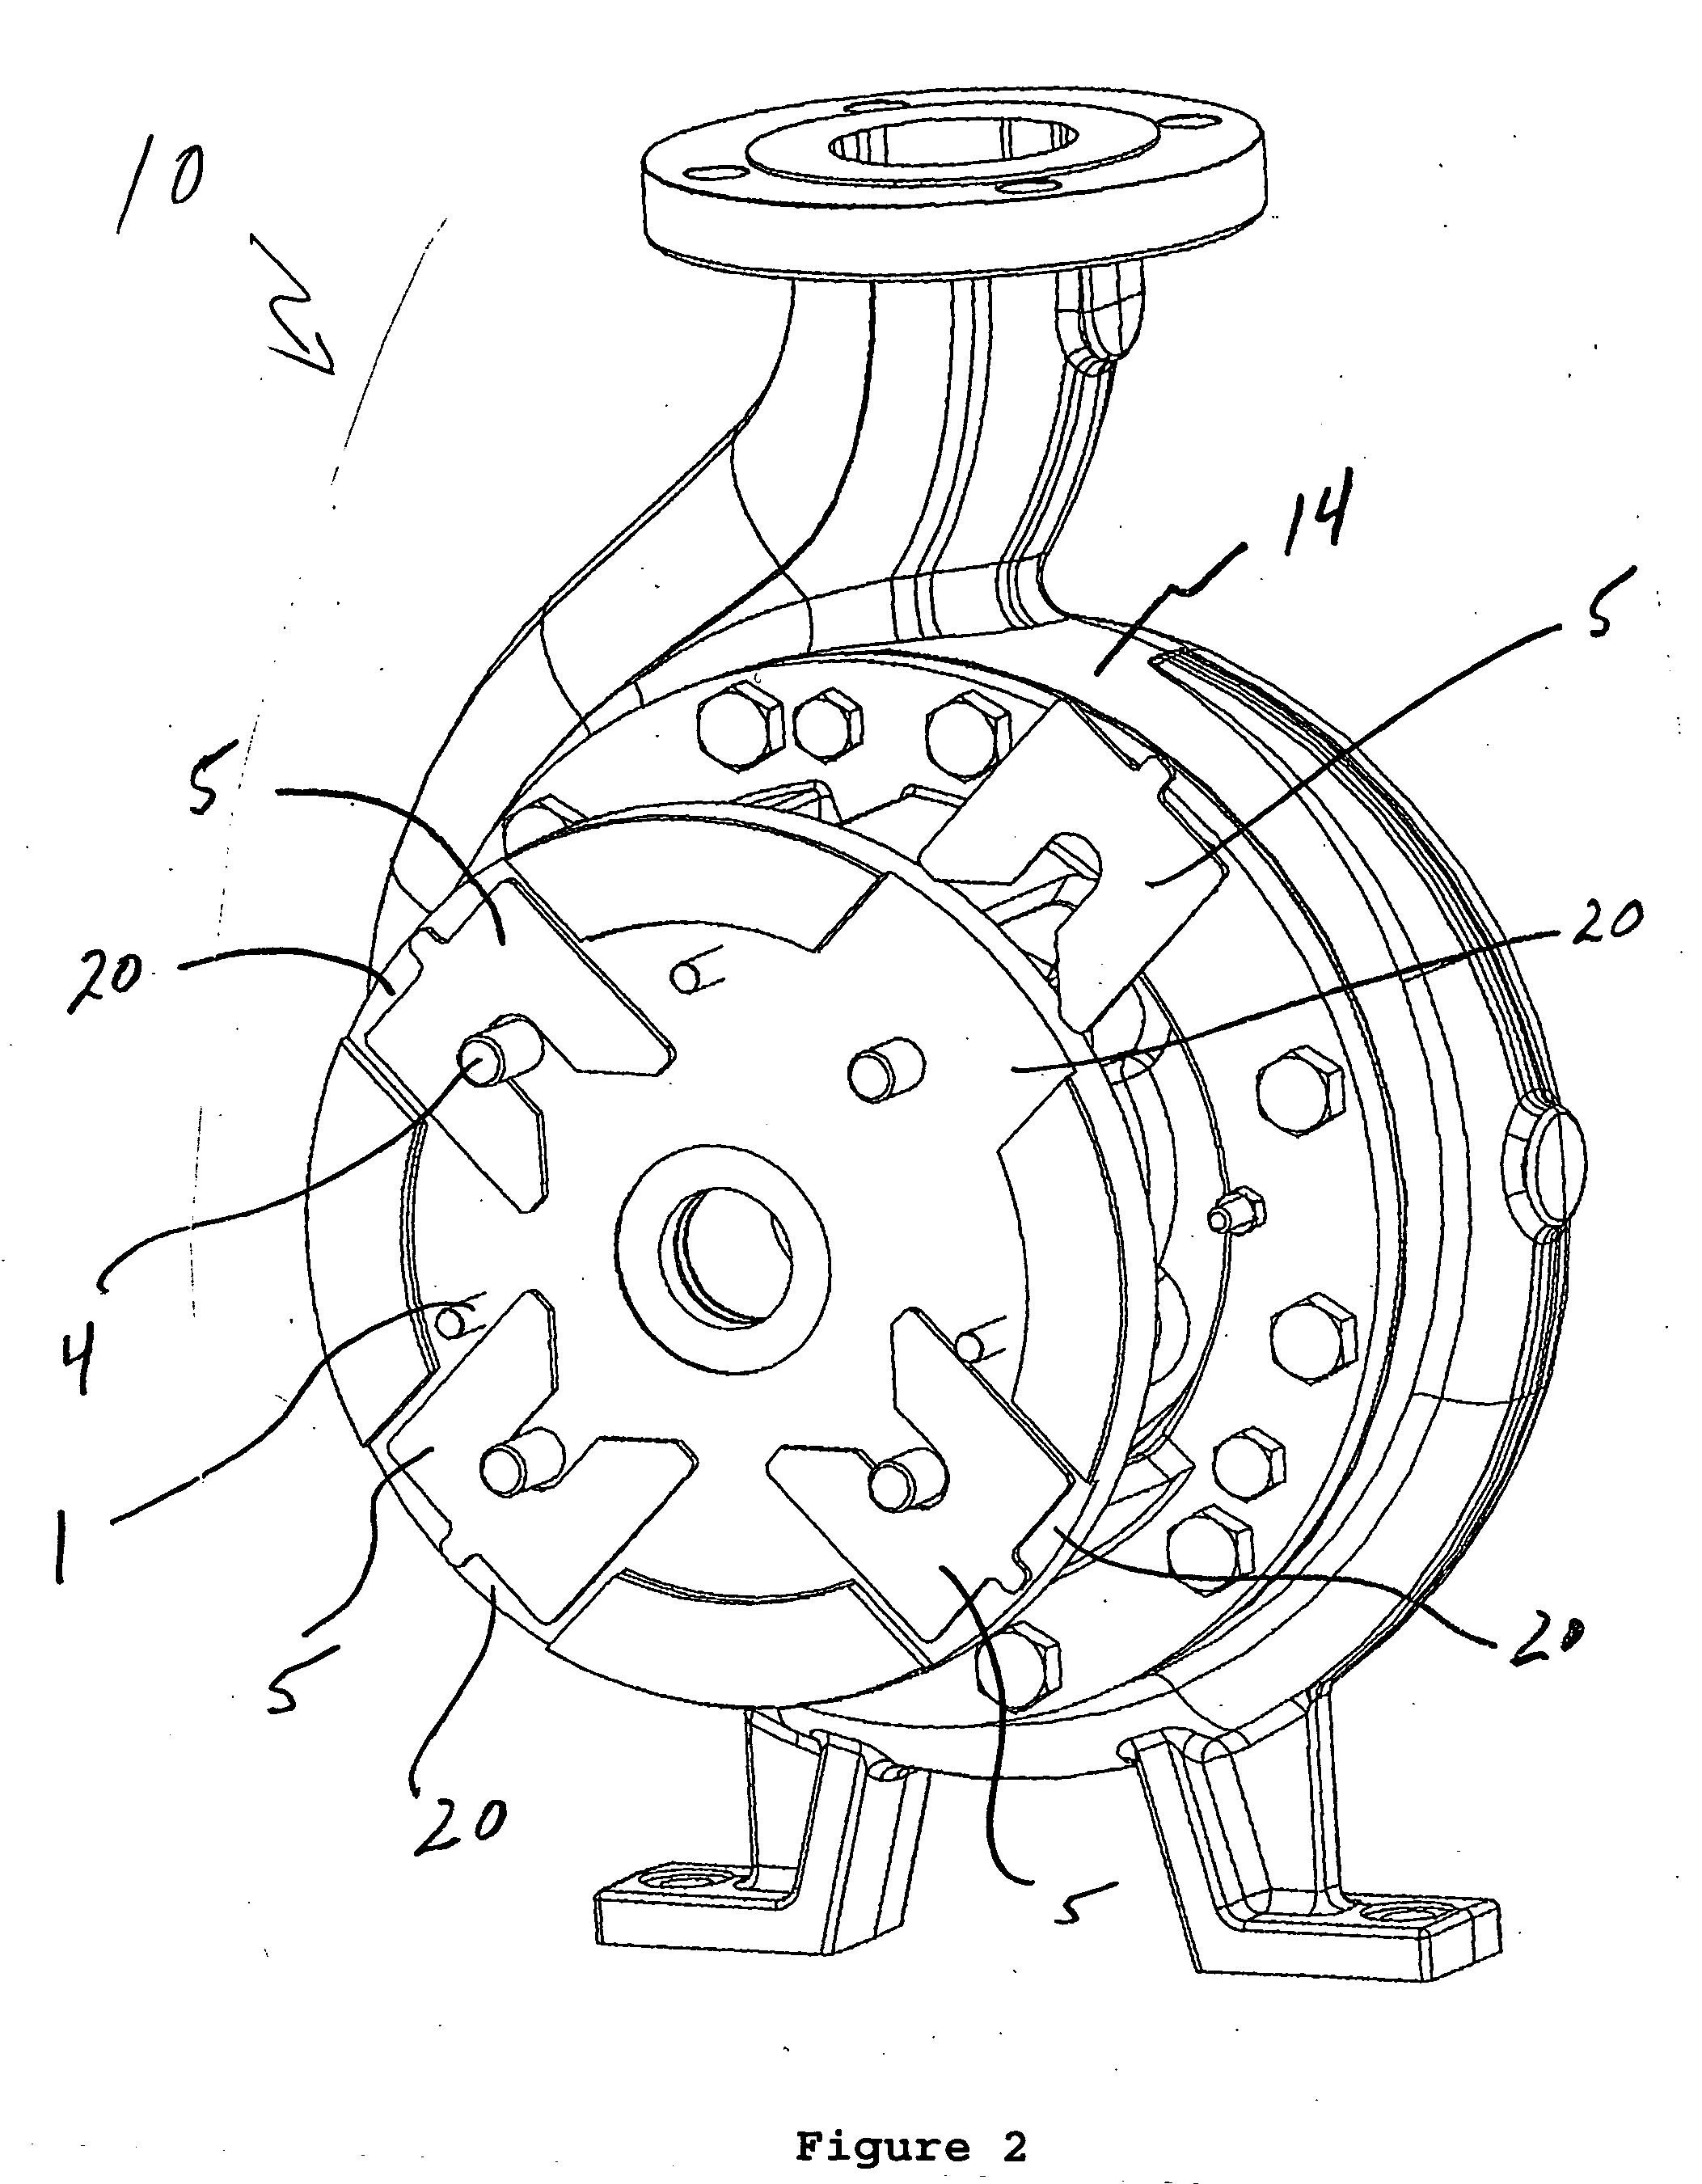 Impeller adjustment device and method for doing the same for close coupled pumps